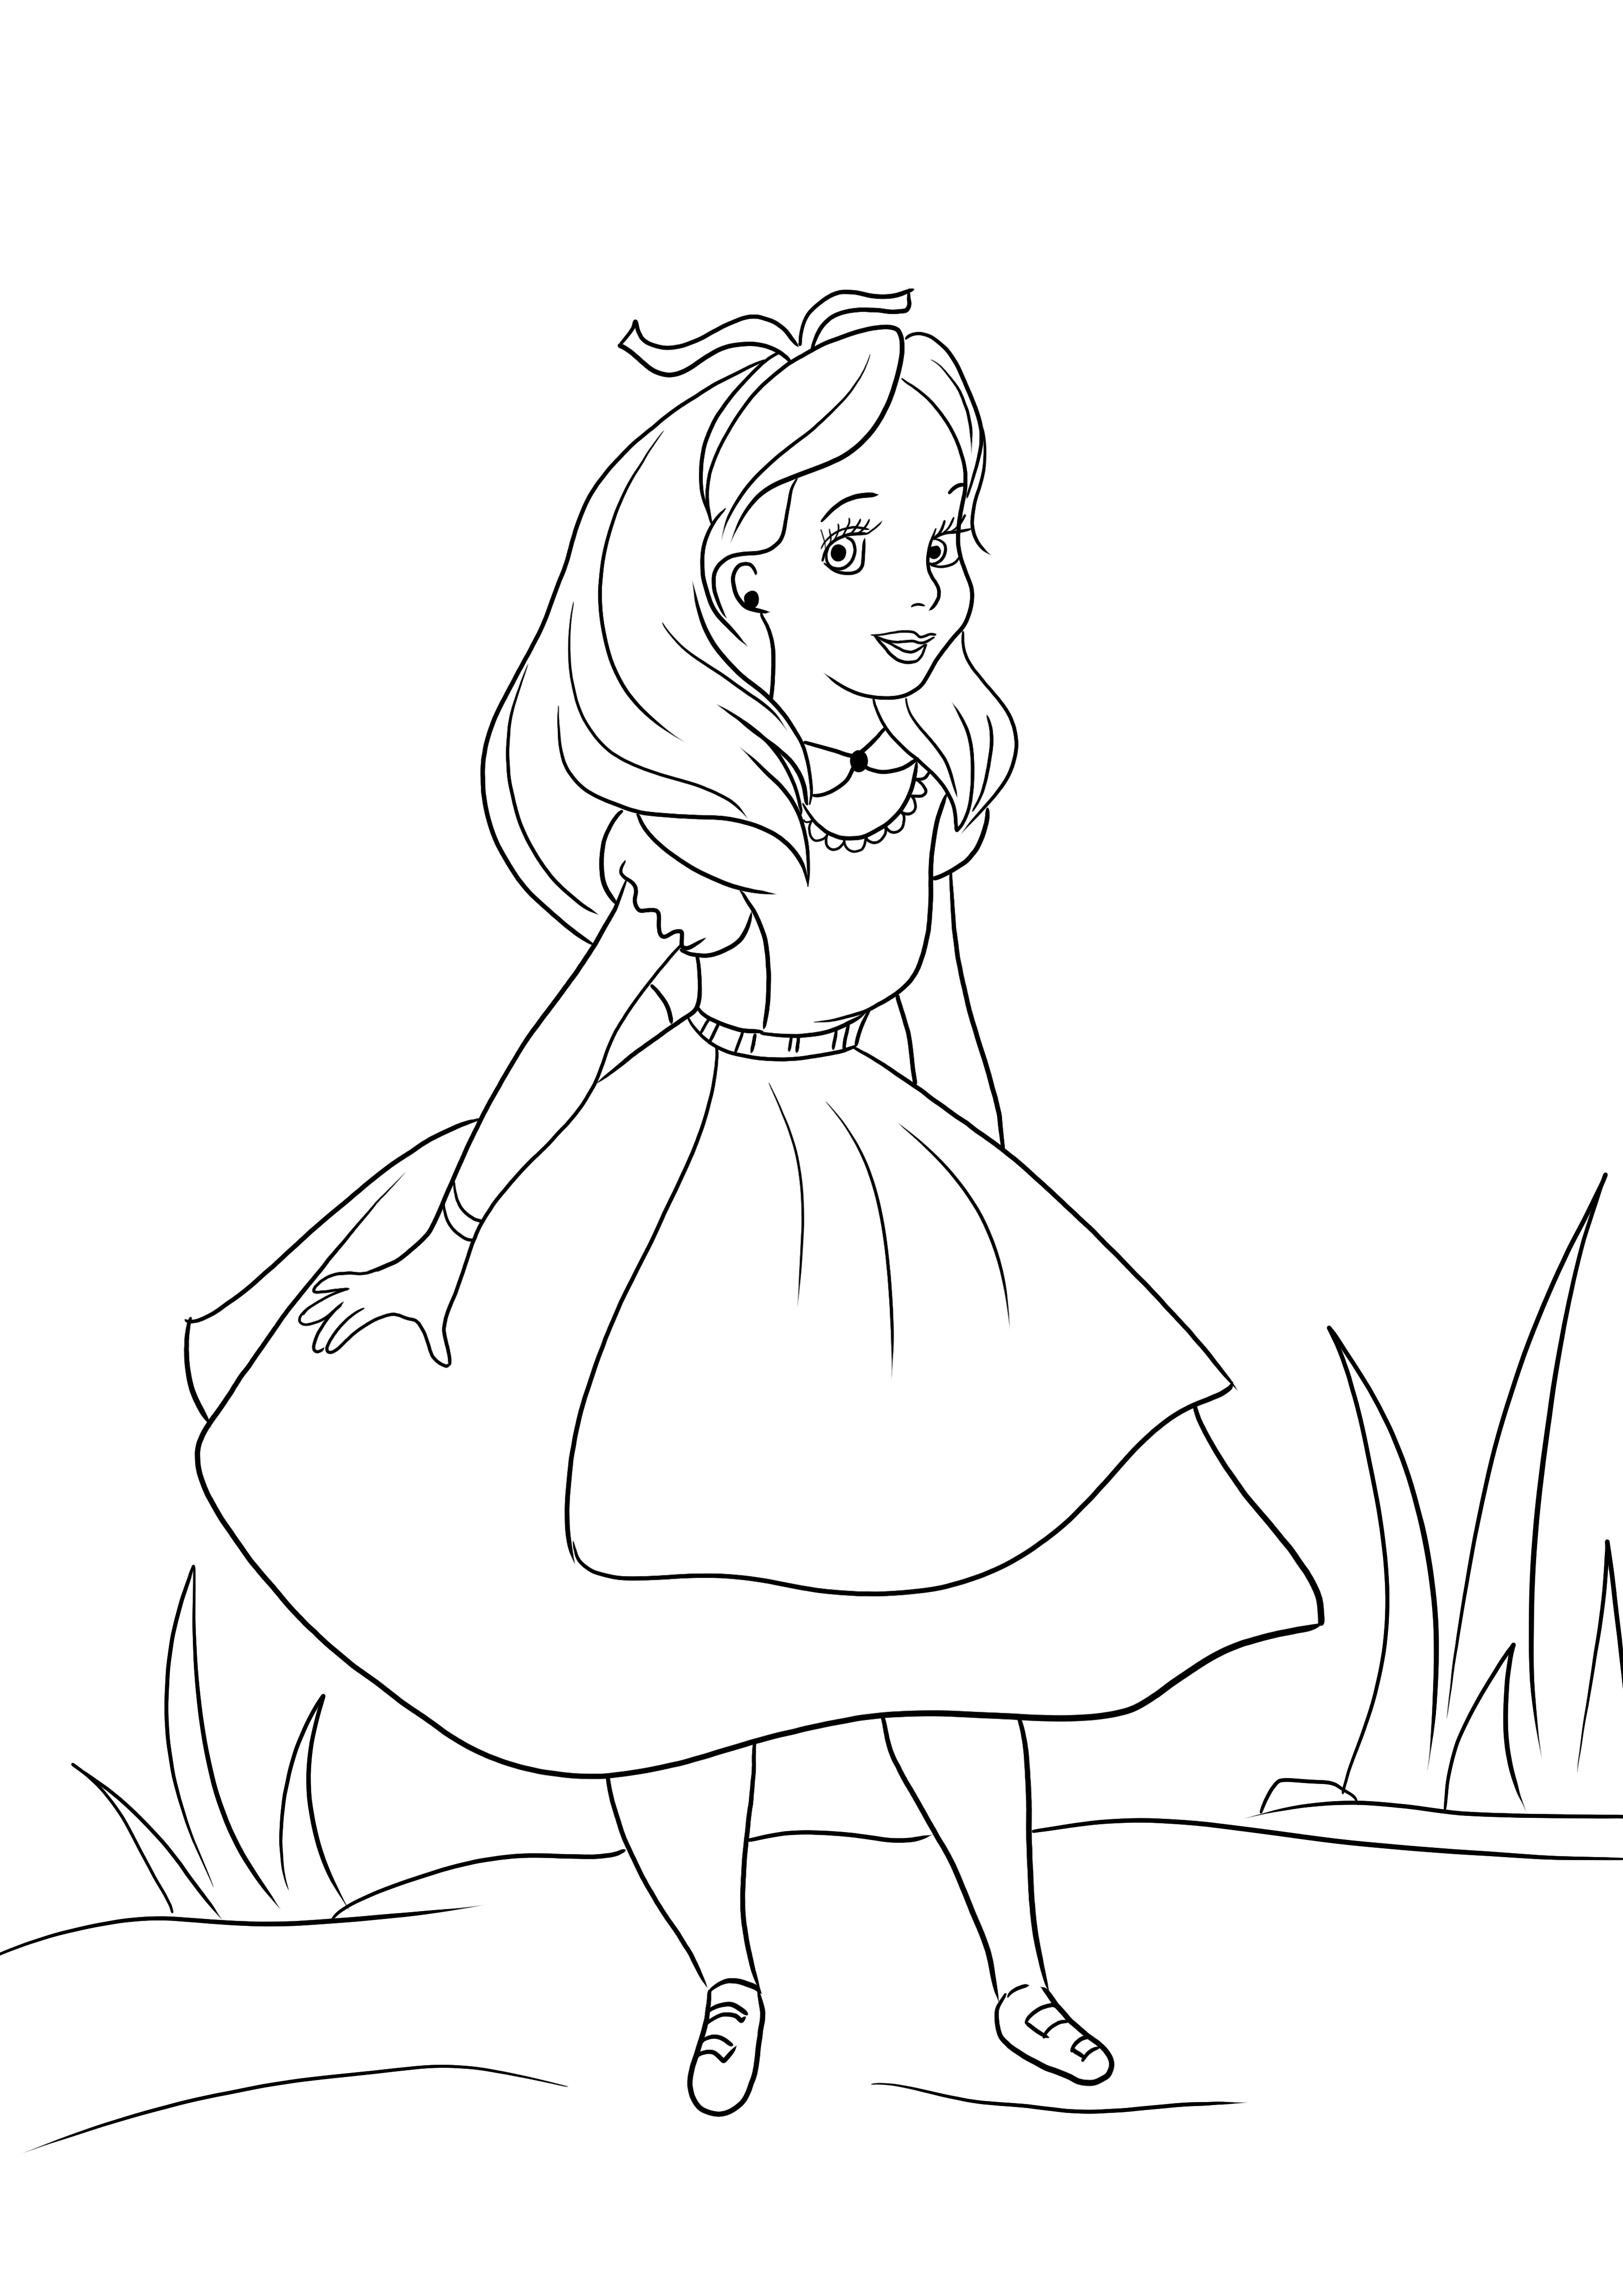 Alice in Wonderland picture for free downloading and fun coloring